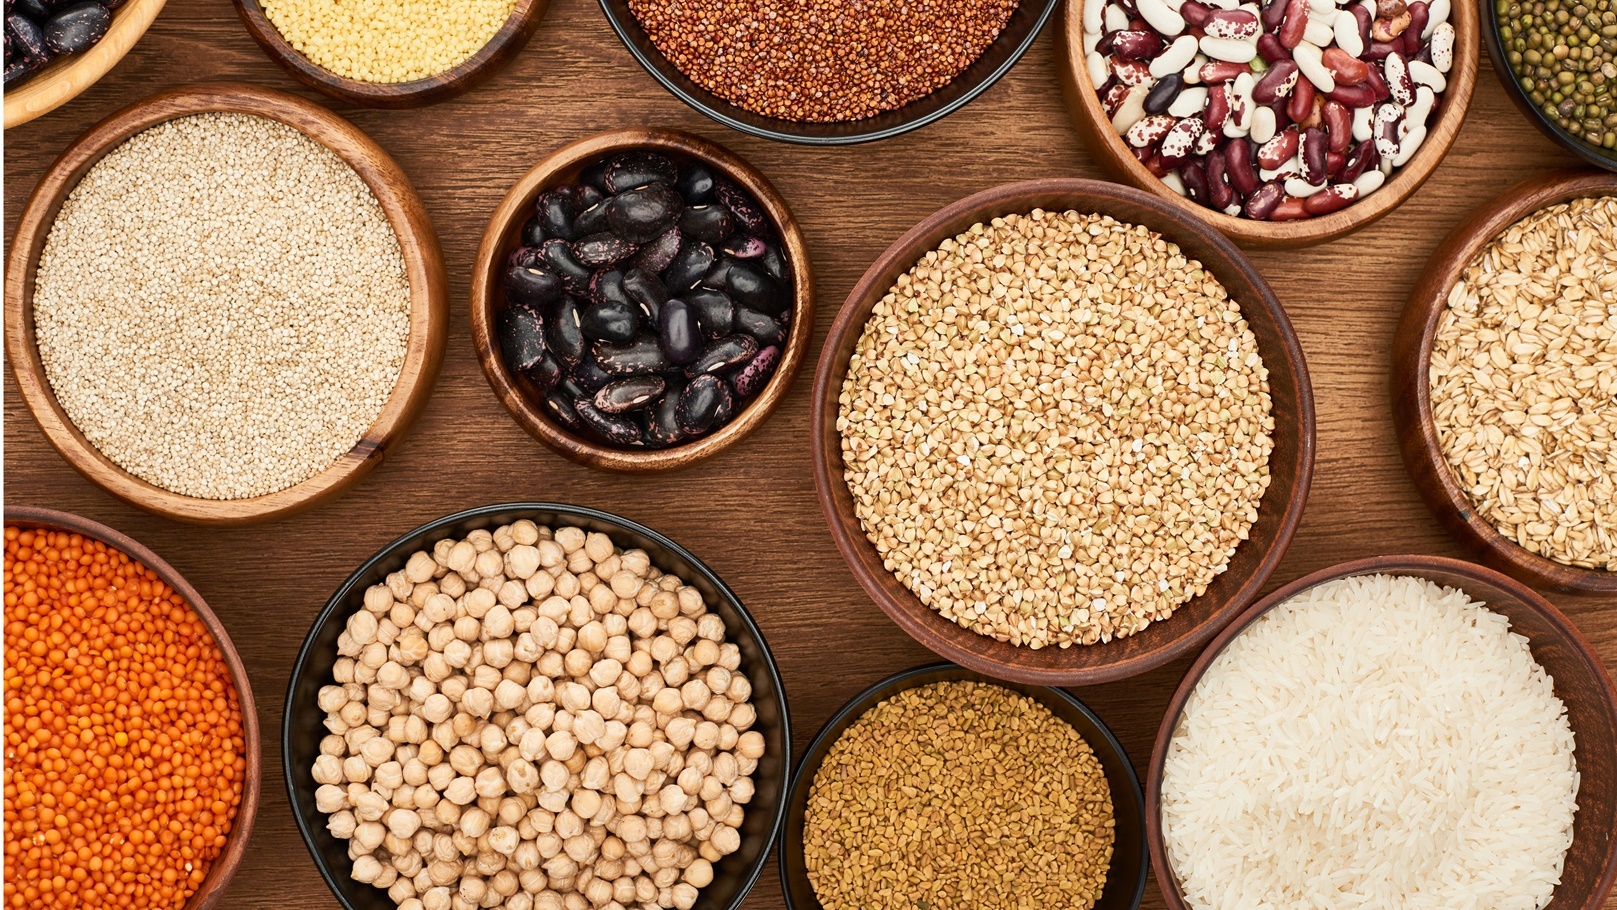 top-view-of-bowls-with-whole-grains-and-legumes-on-2021-08-30-19-51-25-utc